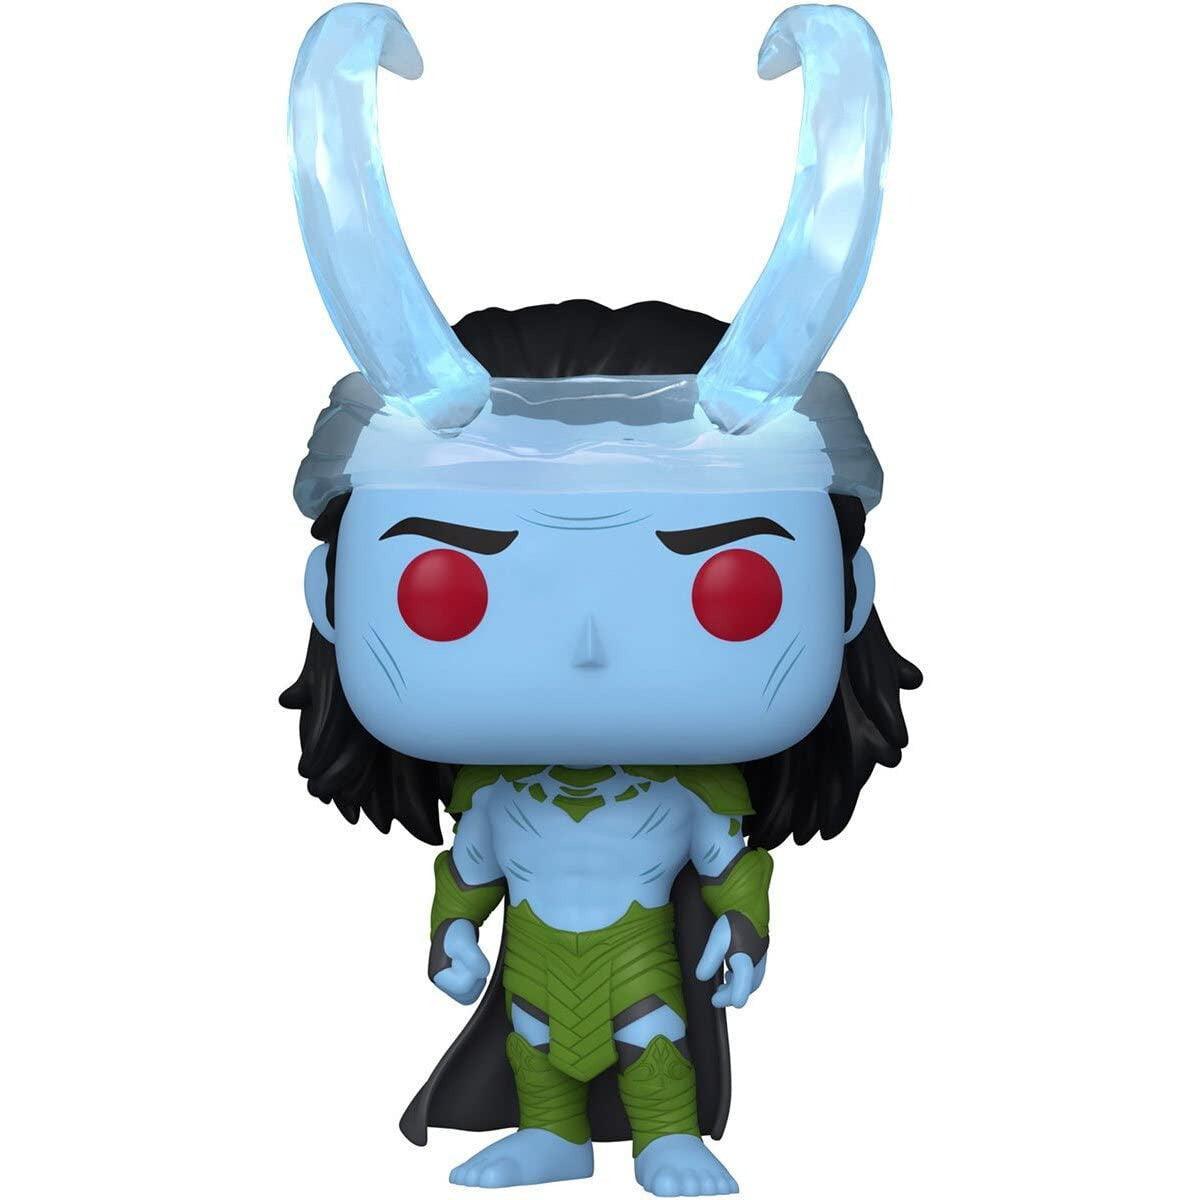 Funko POP Pop! Marvel: What If? - Frost Giant Loki Multicolor - BumbleToys - 18+, Action Figures, Boys, Characters, Funko, Loki, Marvel, Pre-Order